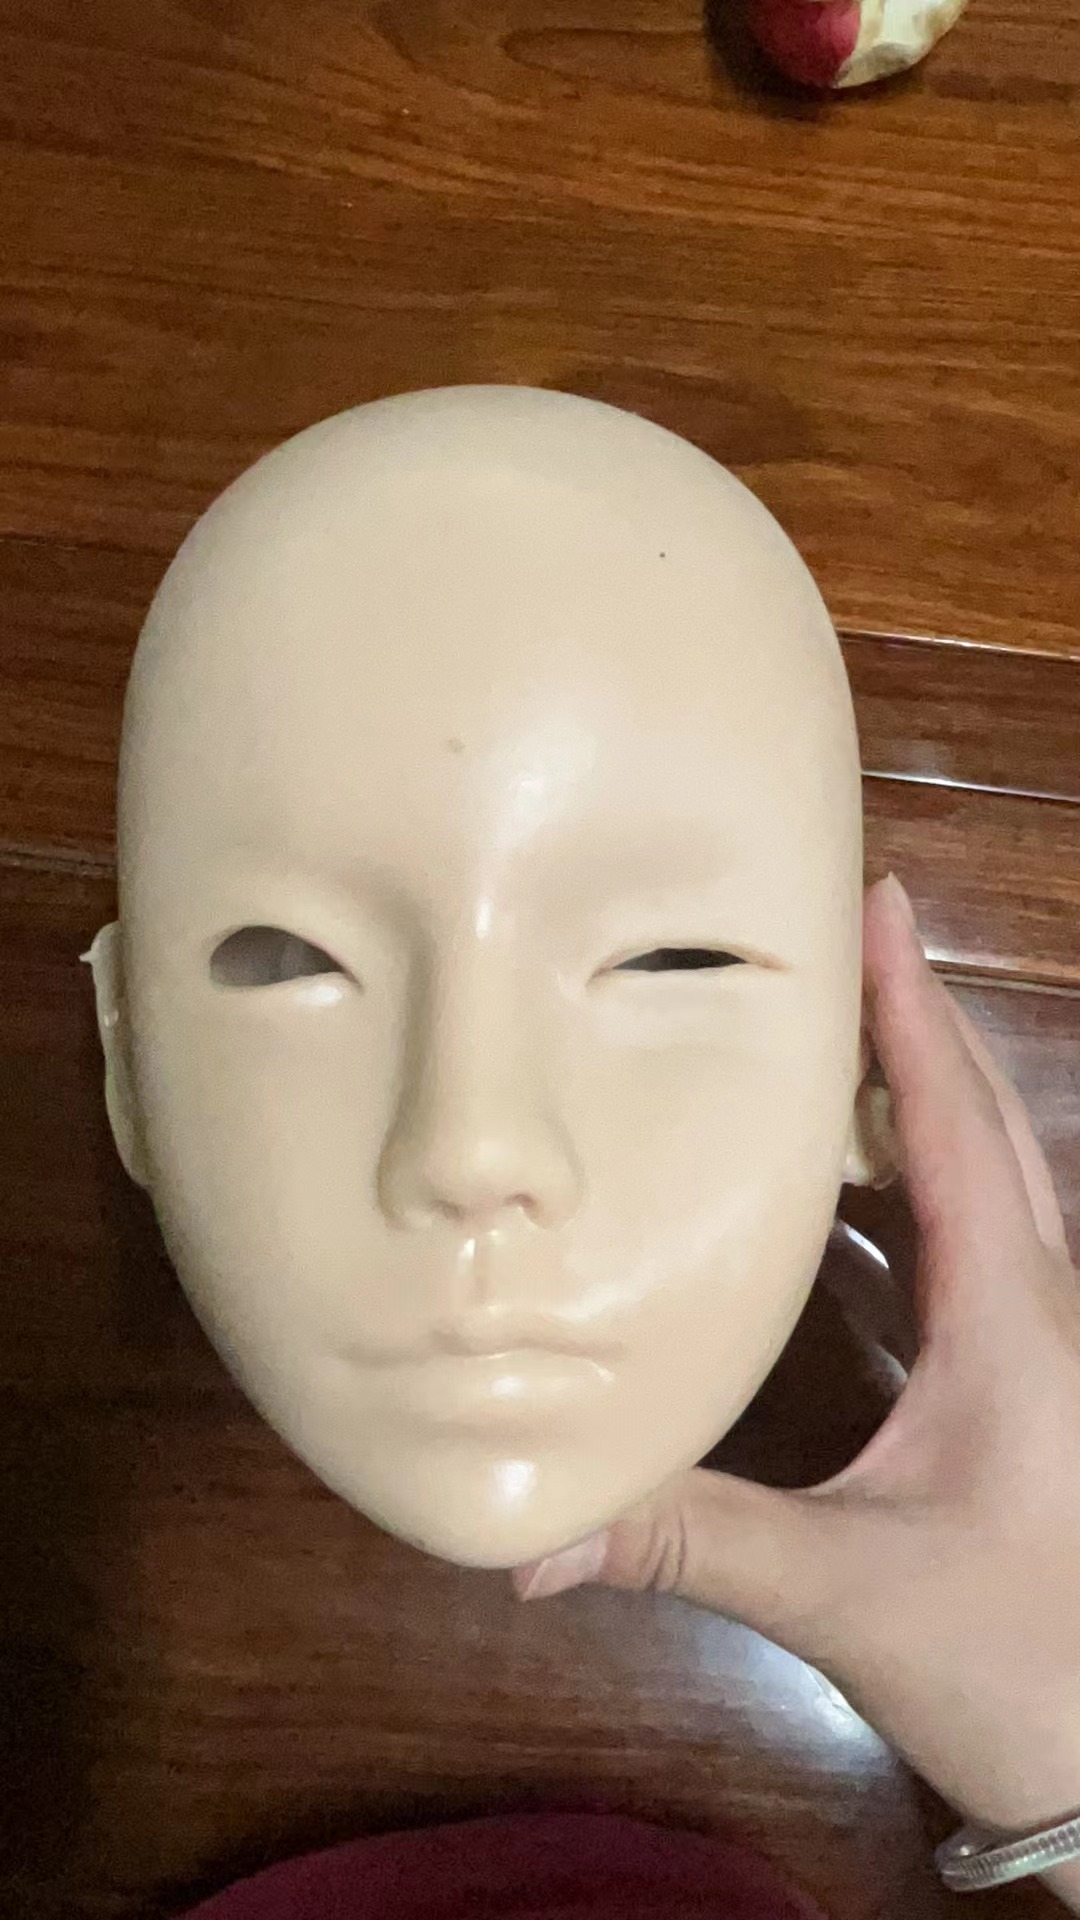 New option – Blinking eyes in a sex love doll face ?